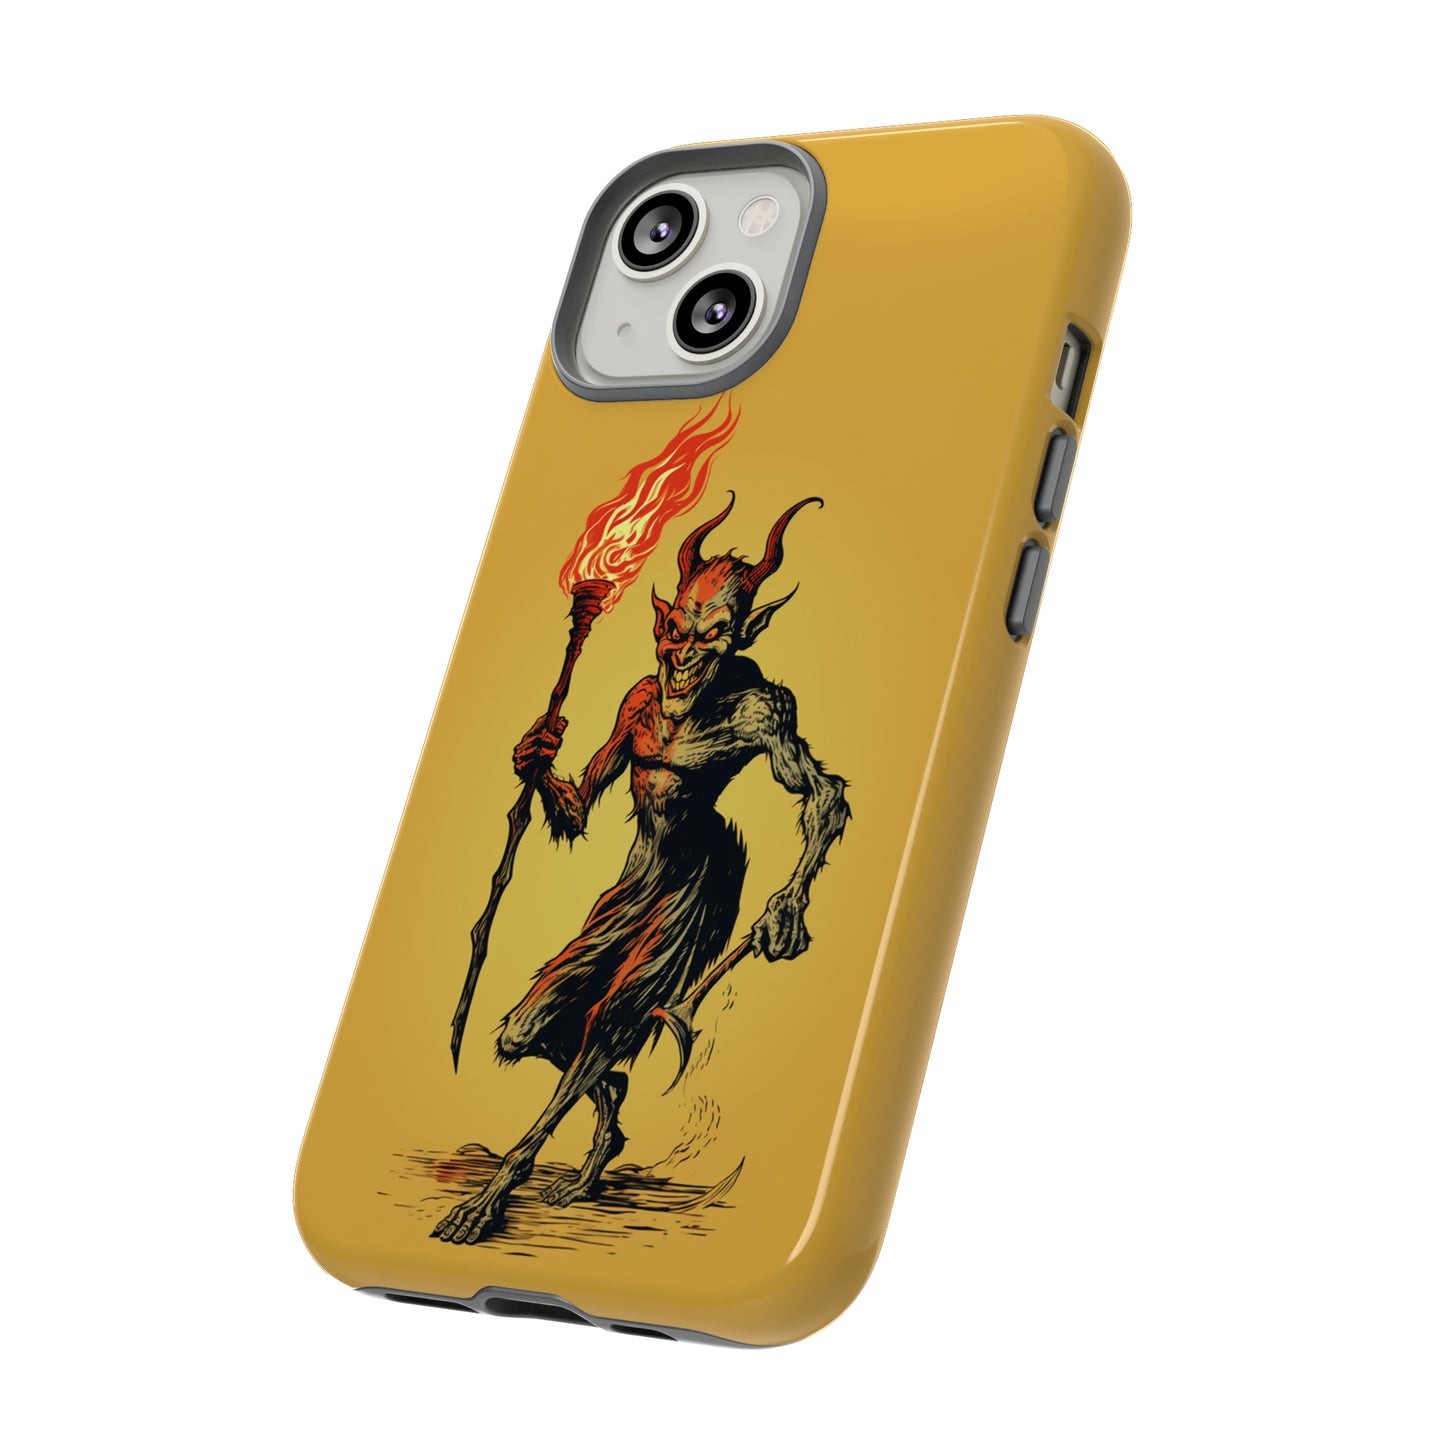 Playful devil-themed phone cover for iPhone 13 Pro Max